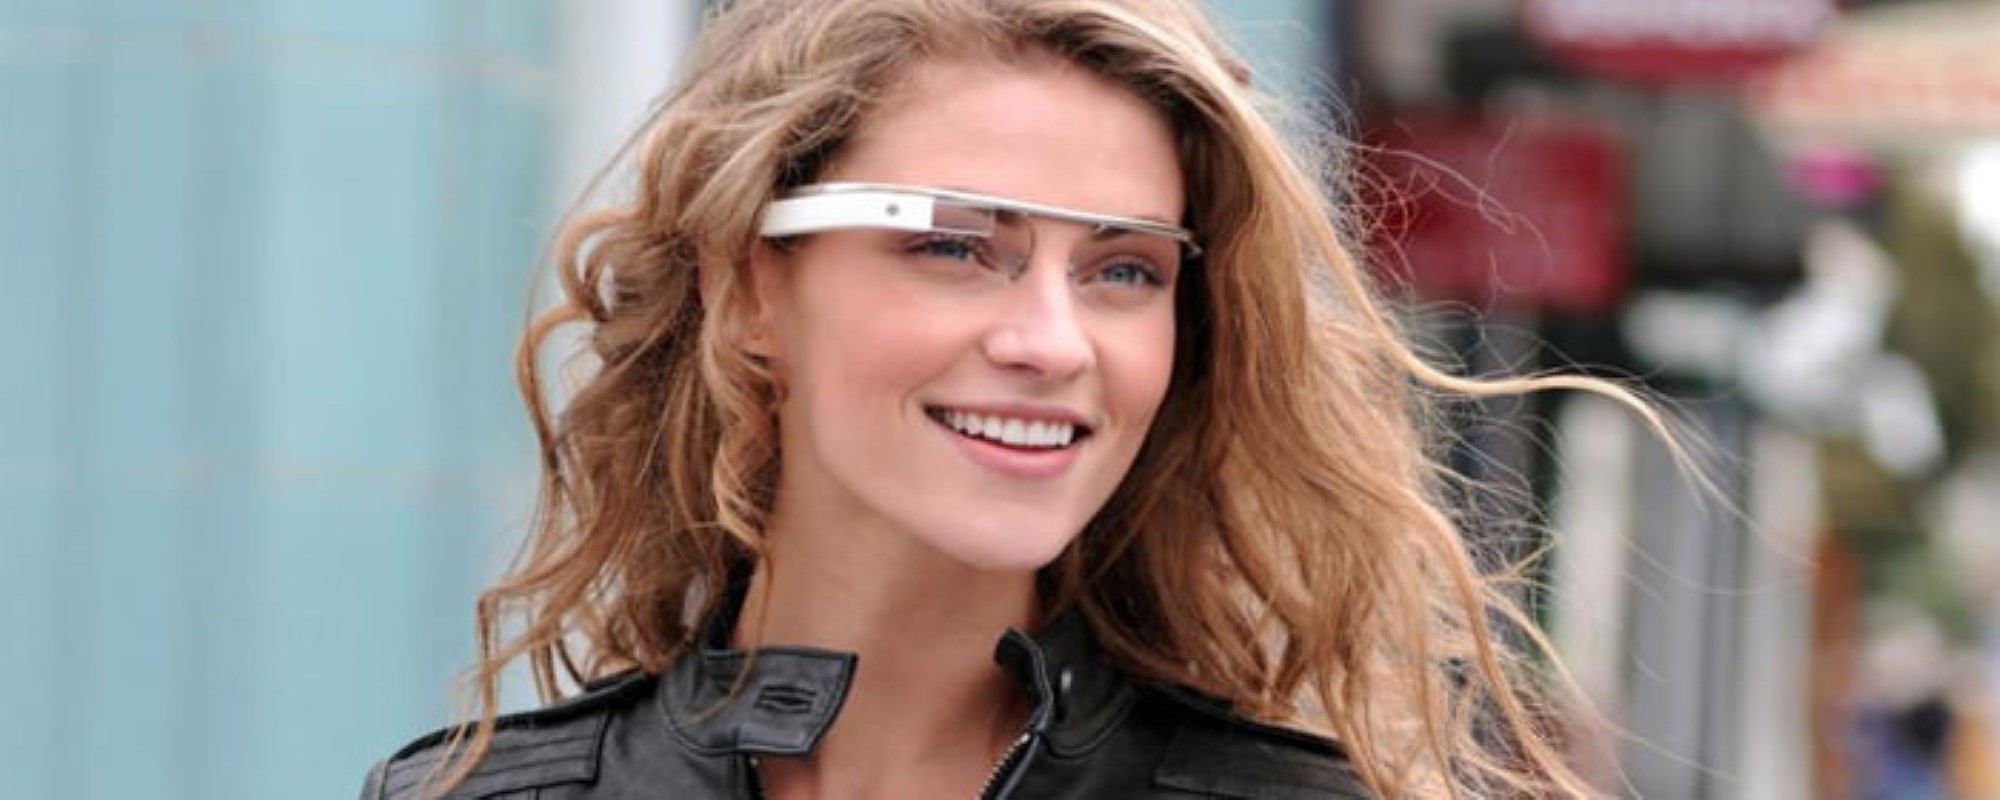 Google Augmented Reality Brille